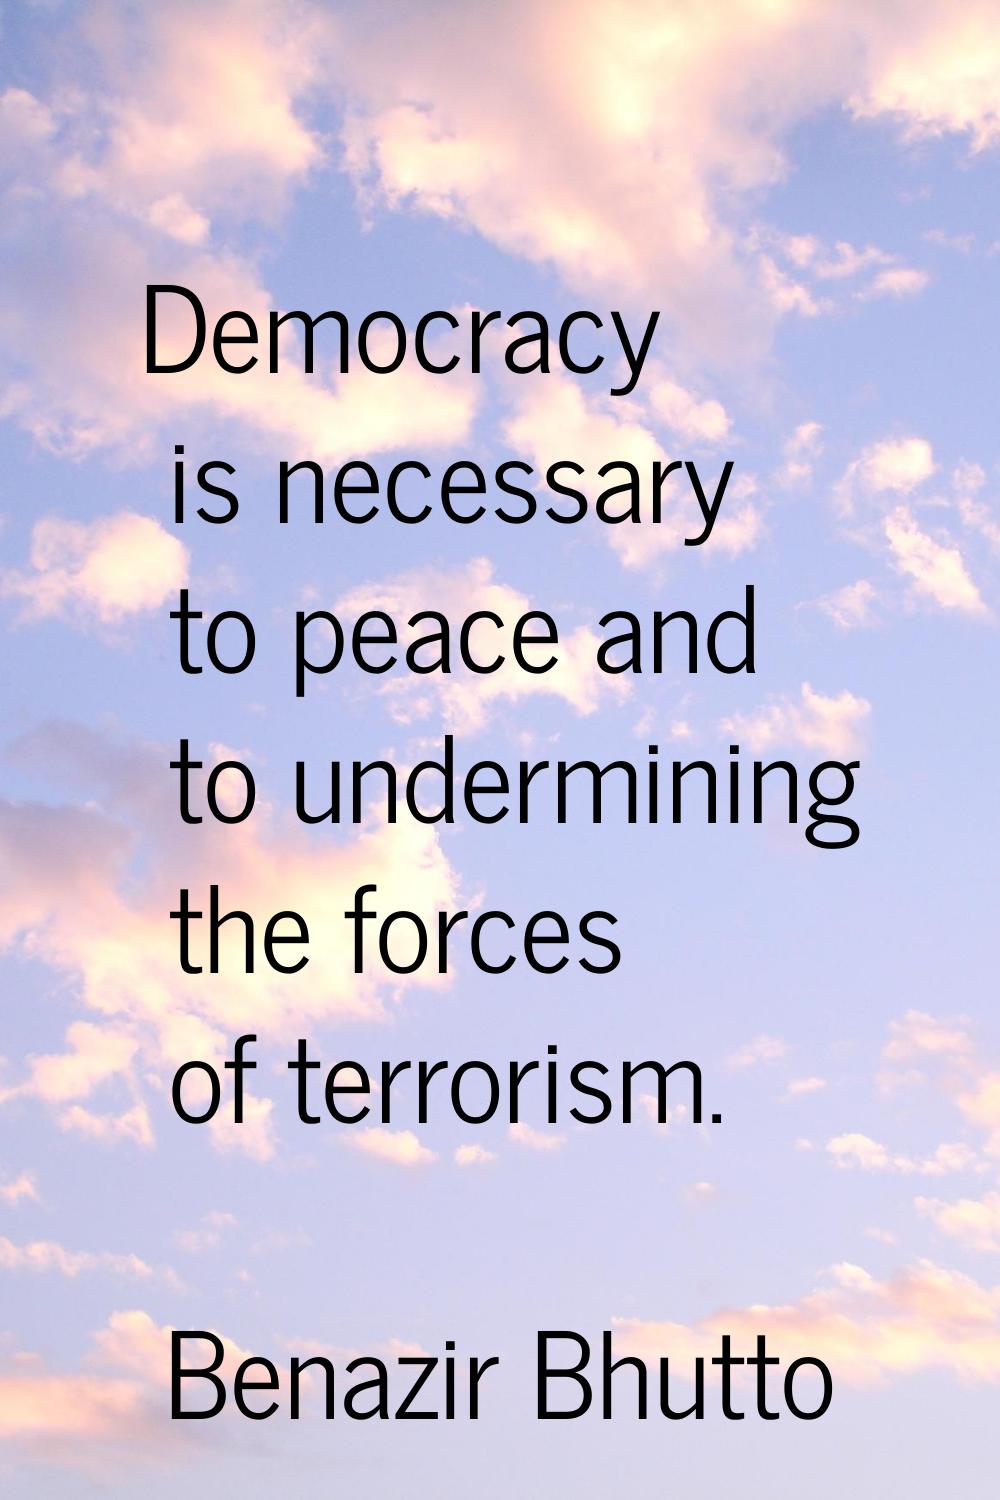 Democracy is necessary to peace and to undermining the forces of terrorism.